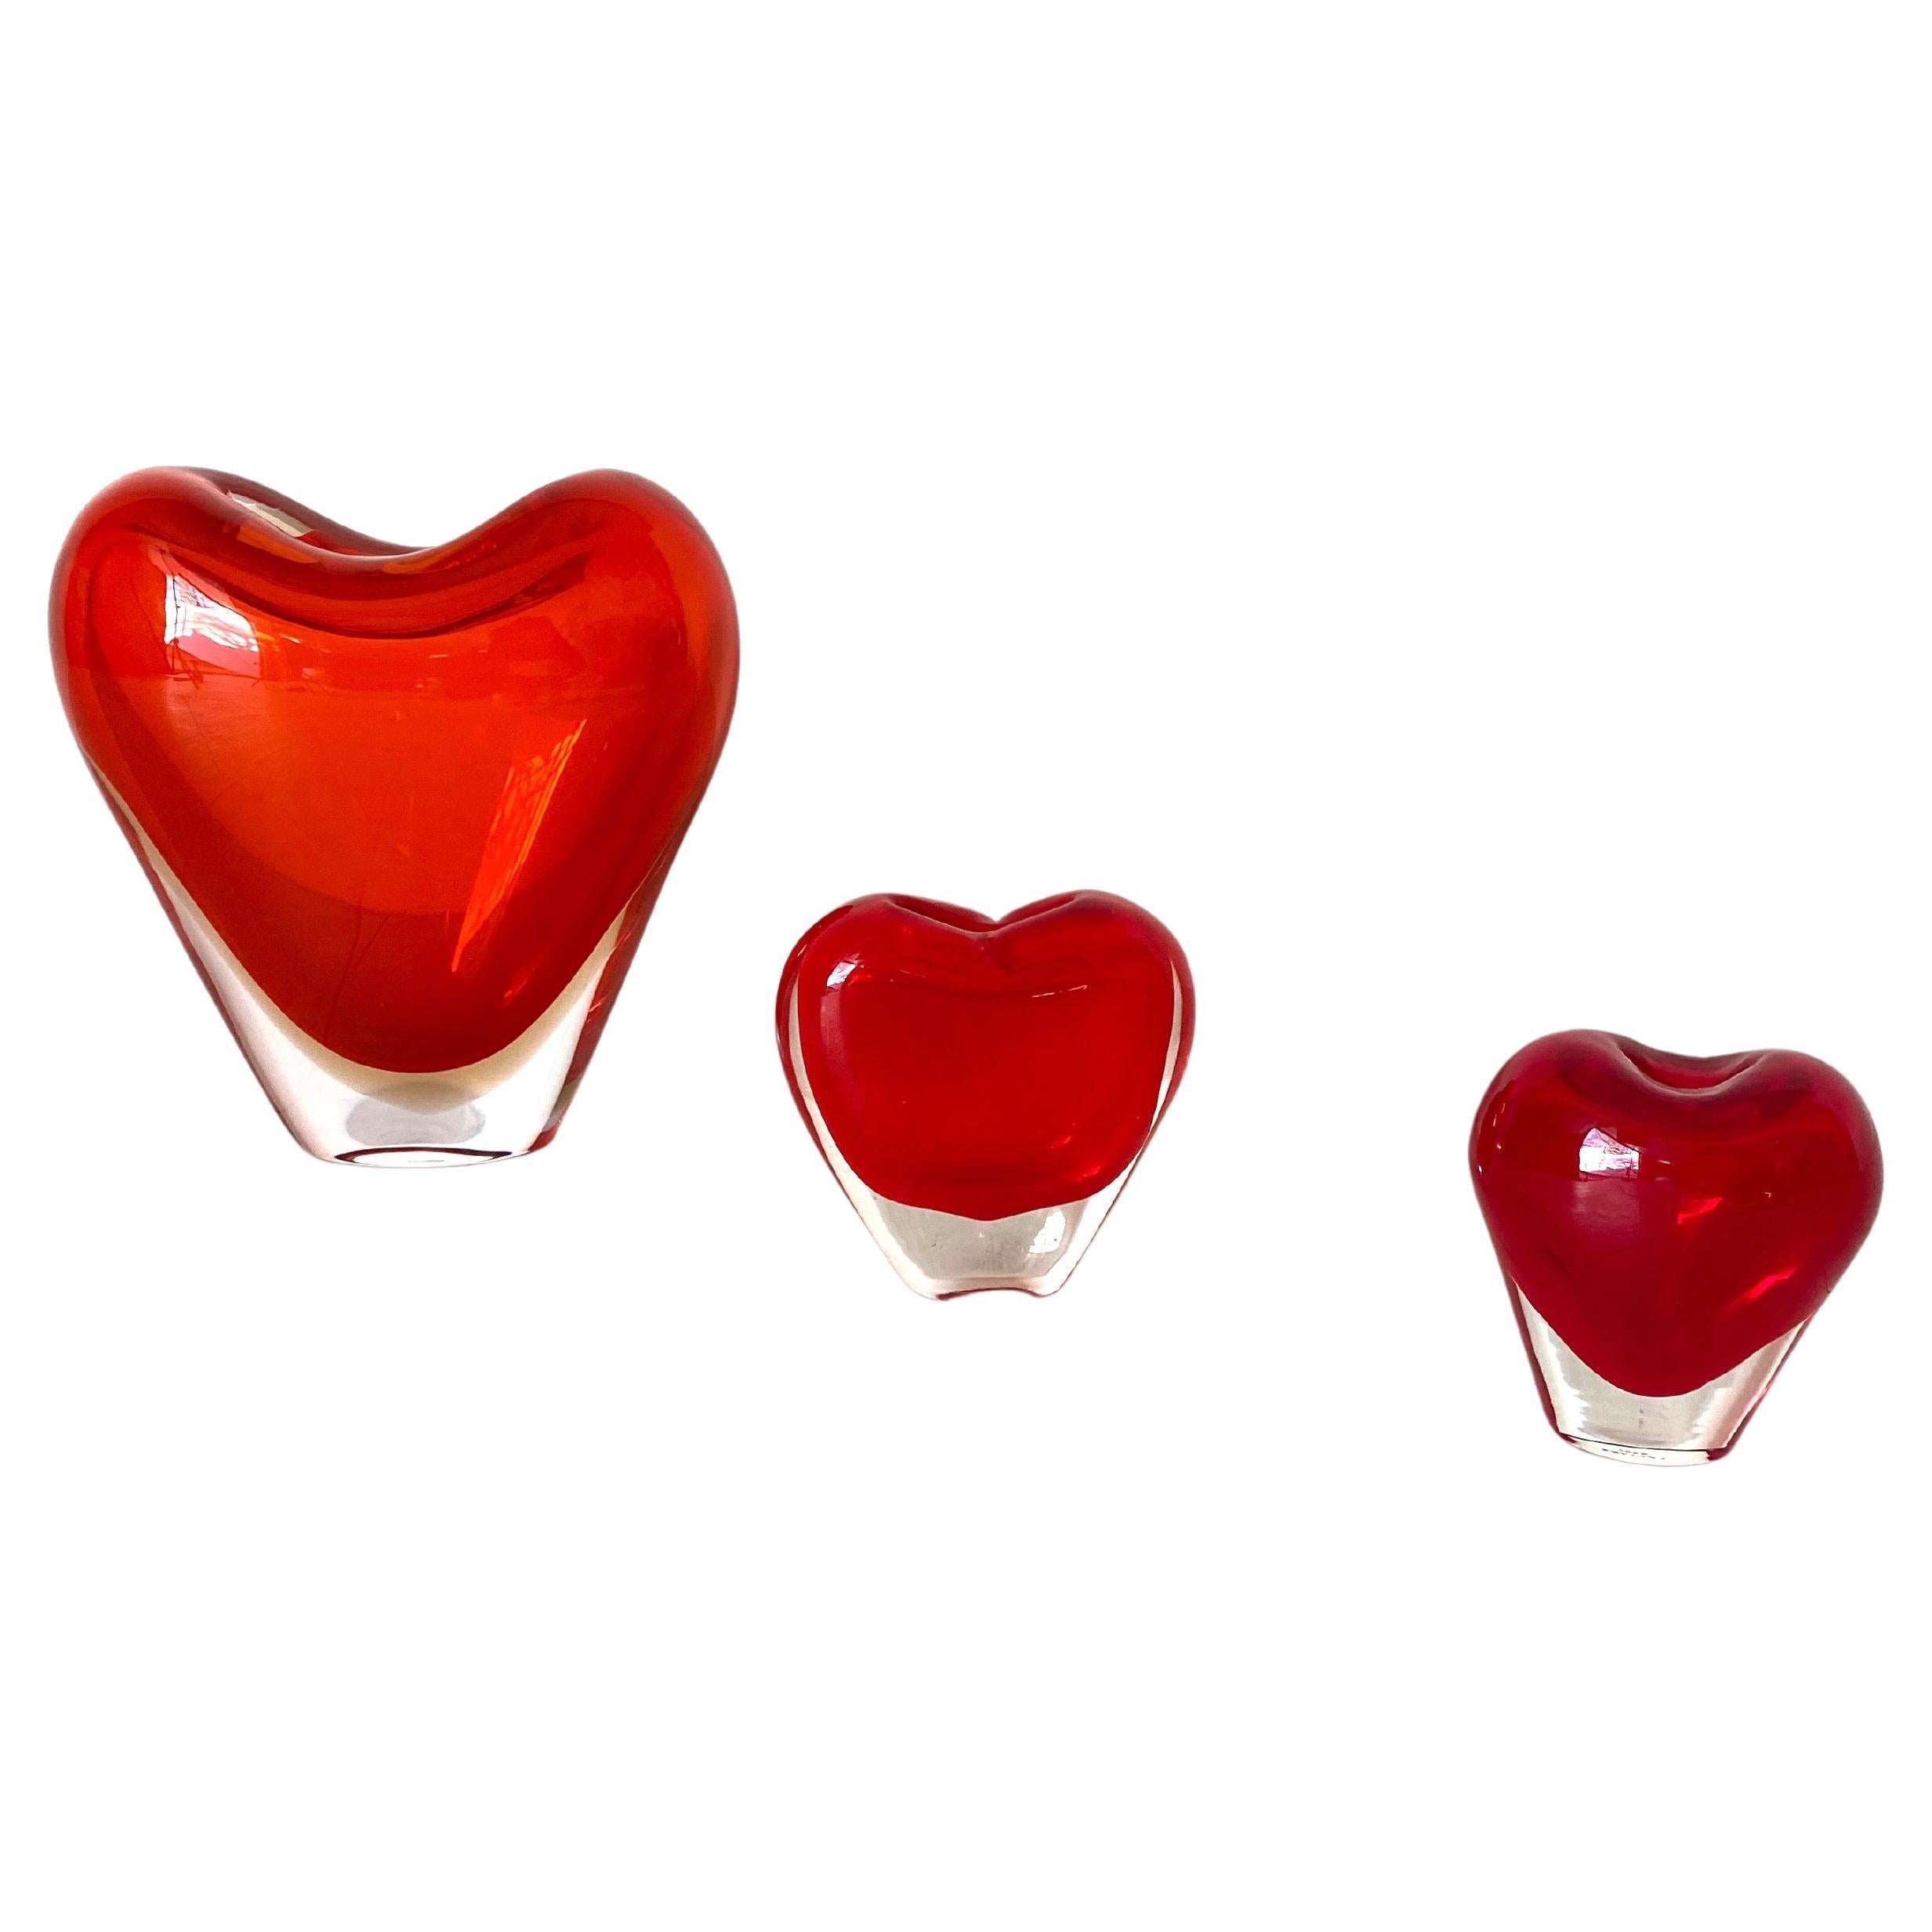 Cuore & Cuoricino Heart Vases by Maria Christina Hamel for Salviati, 1990s For Sale